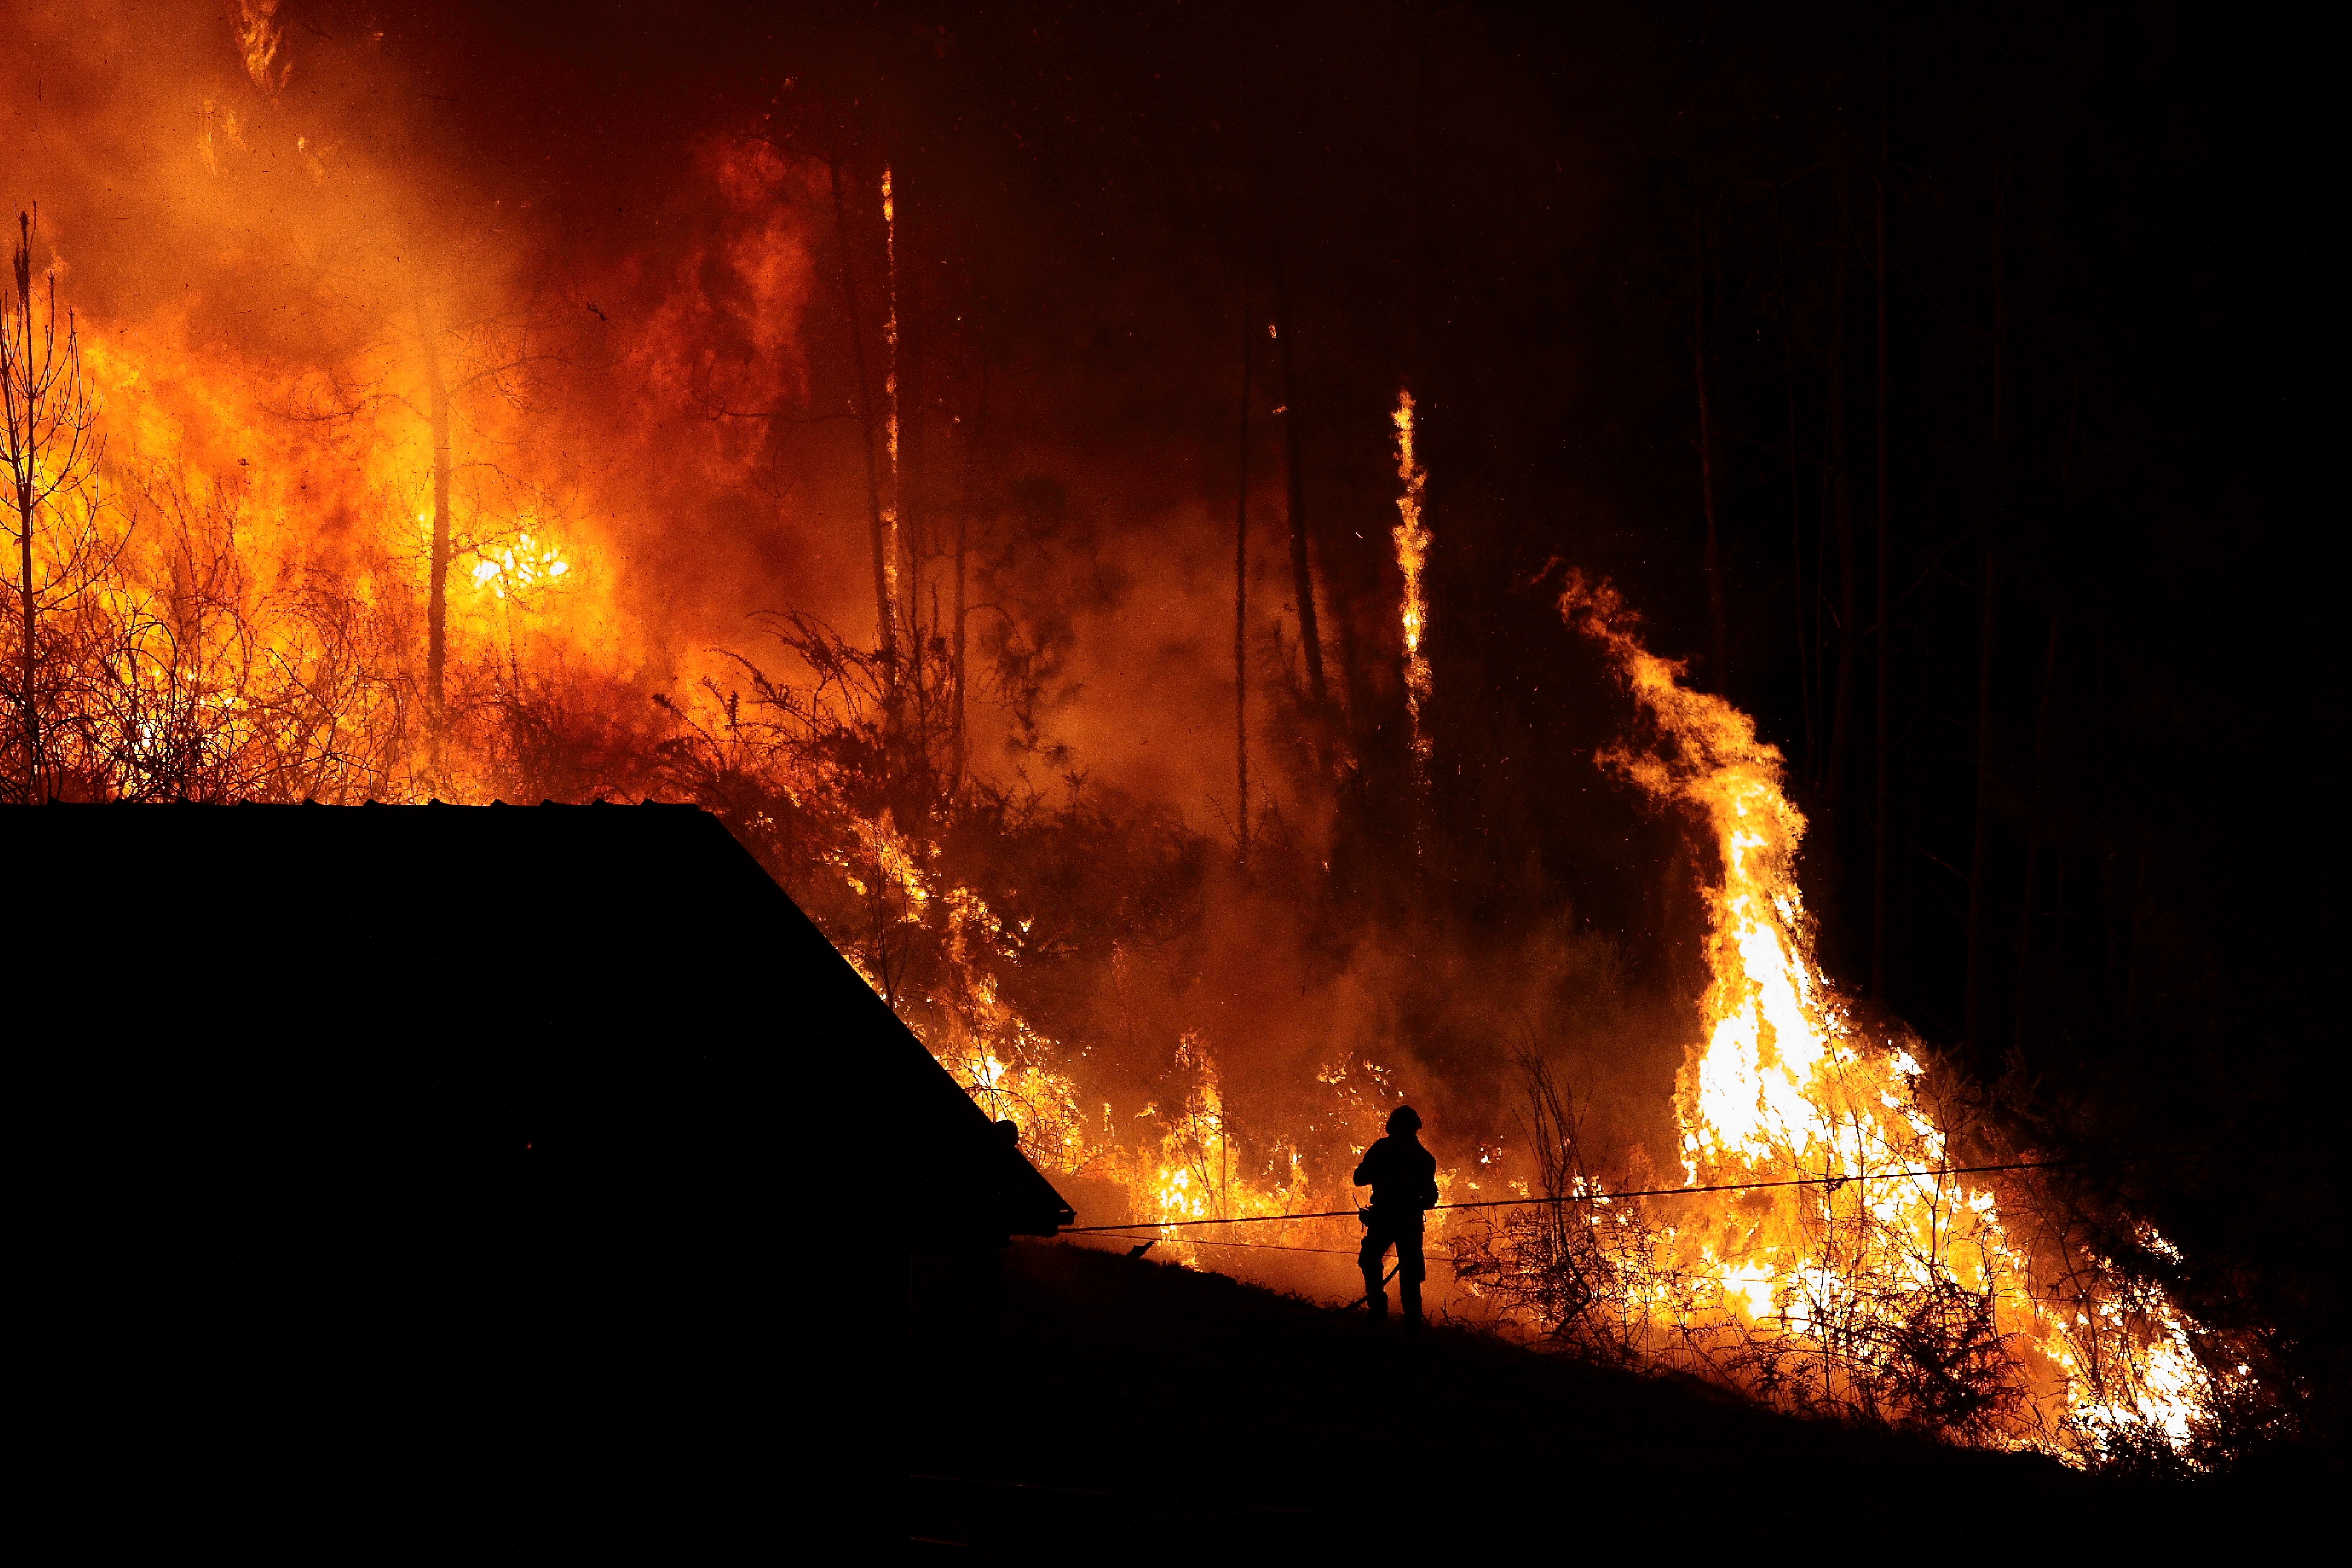 Forest burns close to houses, fireman silhouette